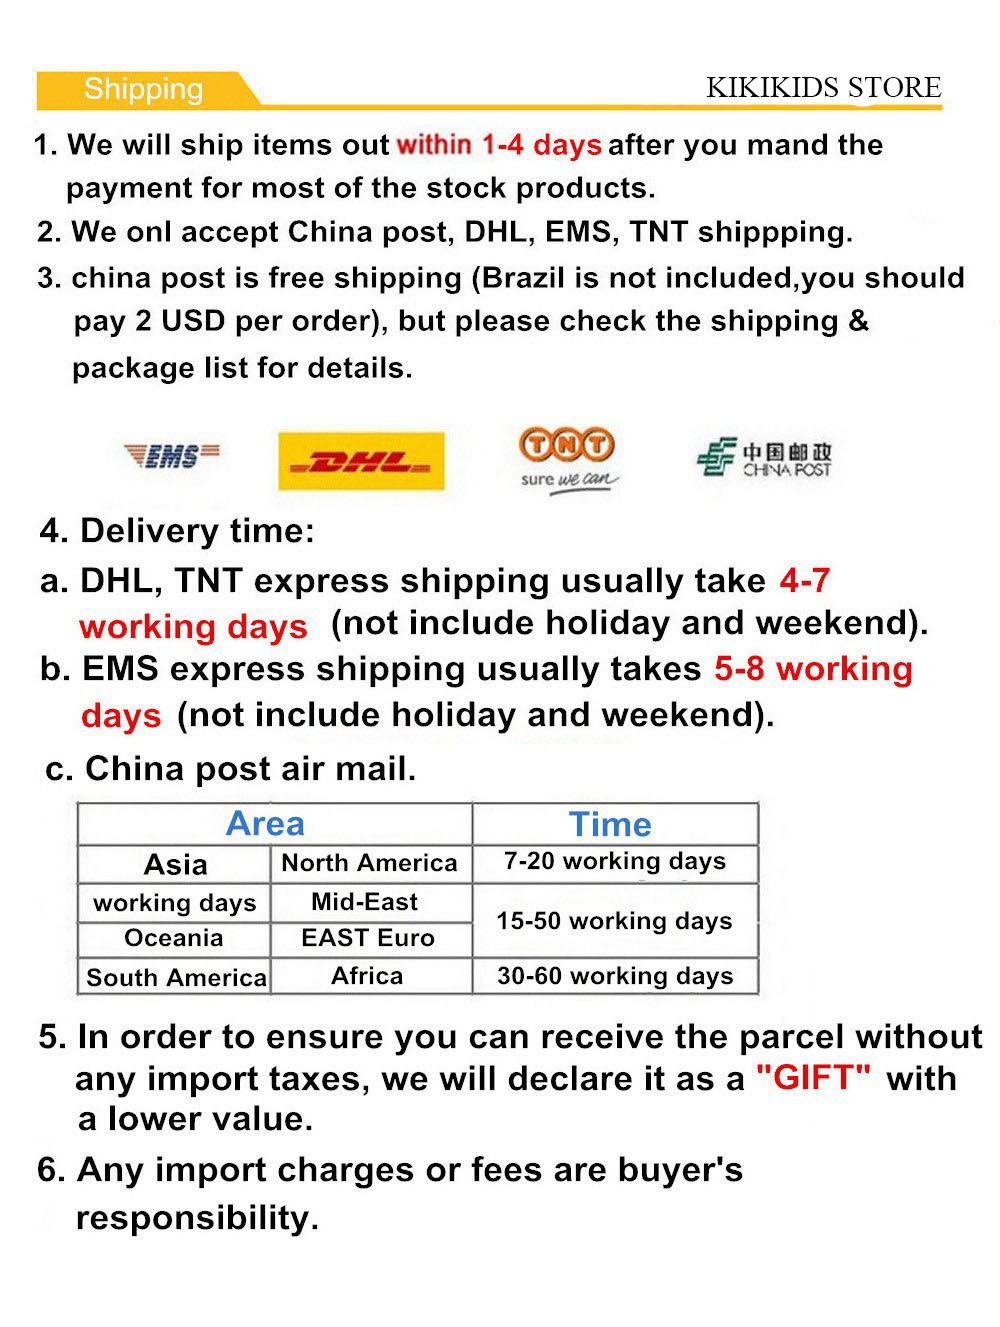 SHIPPING NOTE (3)